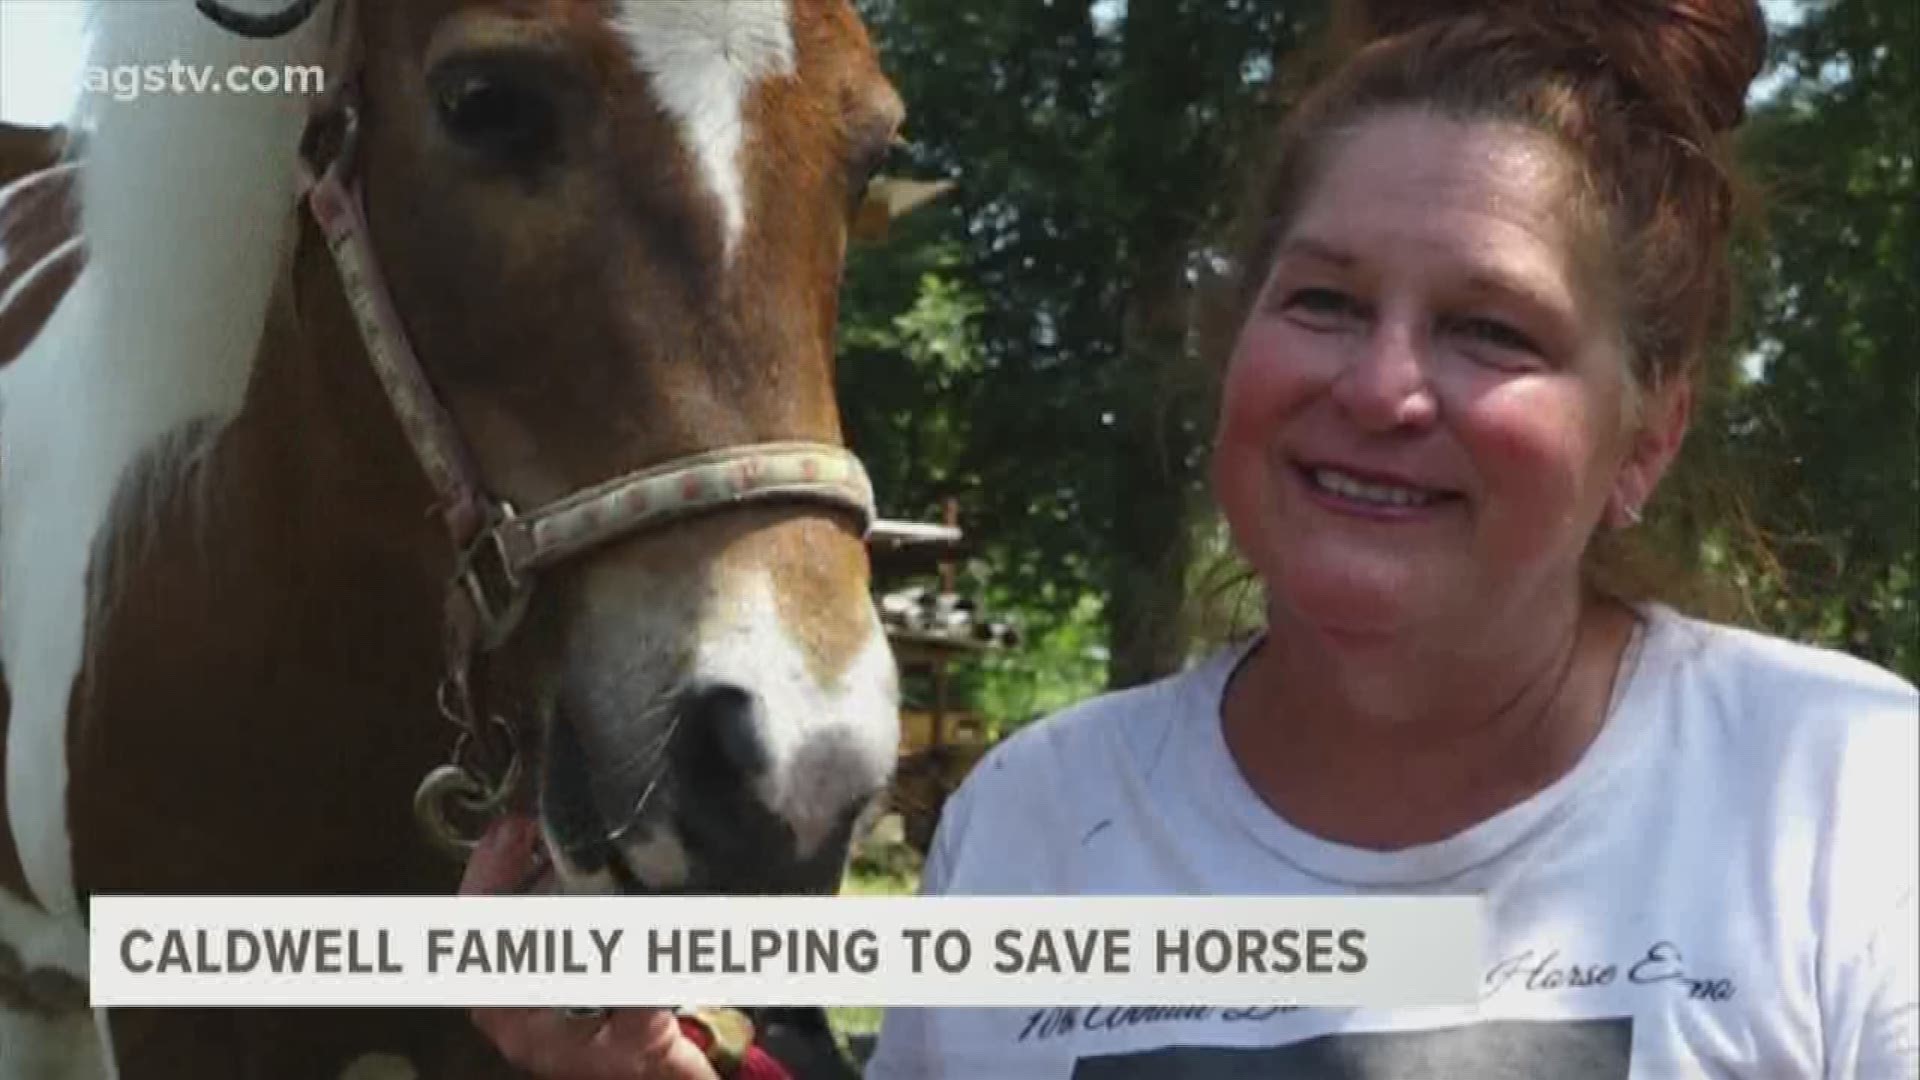 Every week we highlight a local rescue or shelter that works every day to save animals in our area. Tonight, we meet some of those good samaritans from Caldwell who are on a mission to rescue horses and find them forever homes.